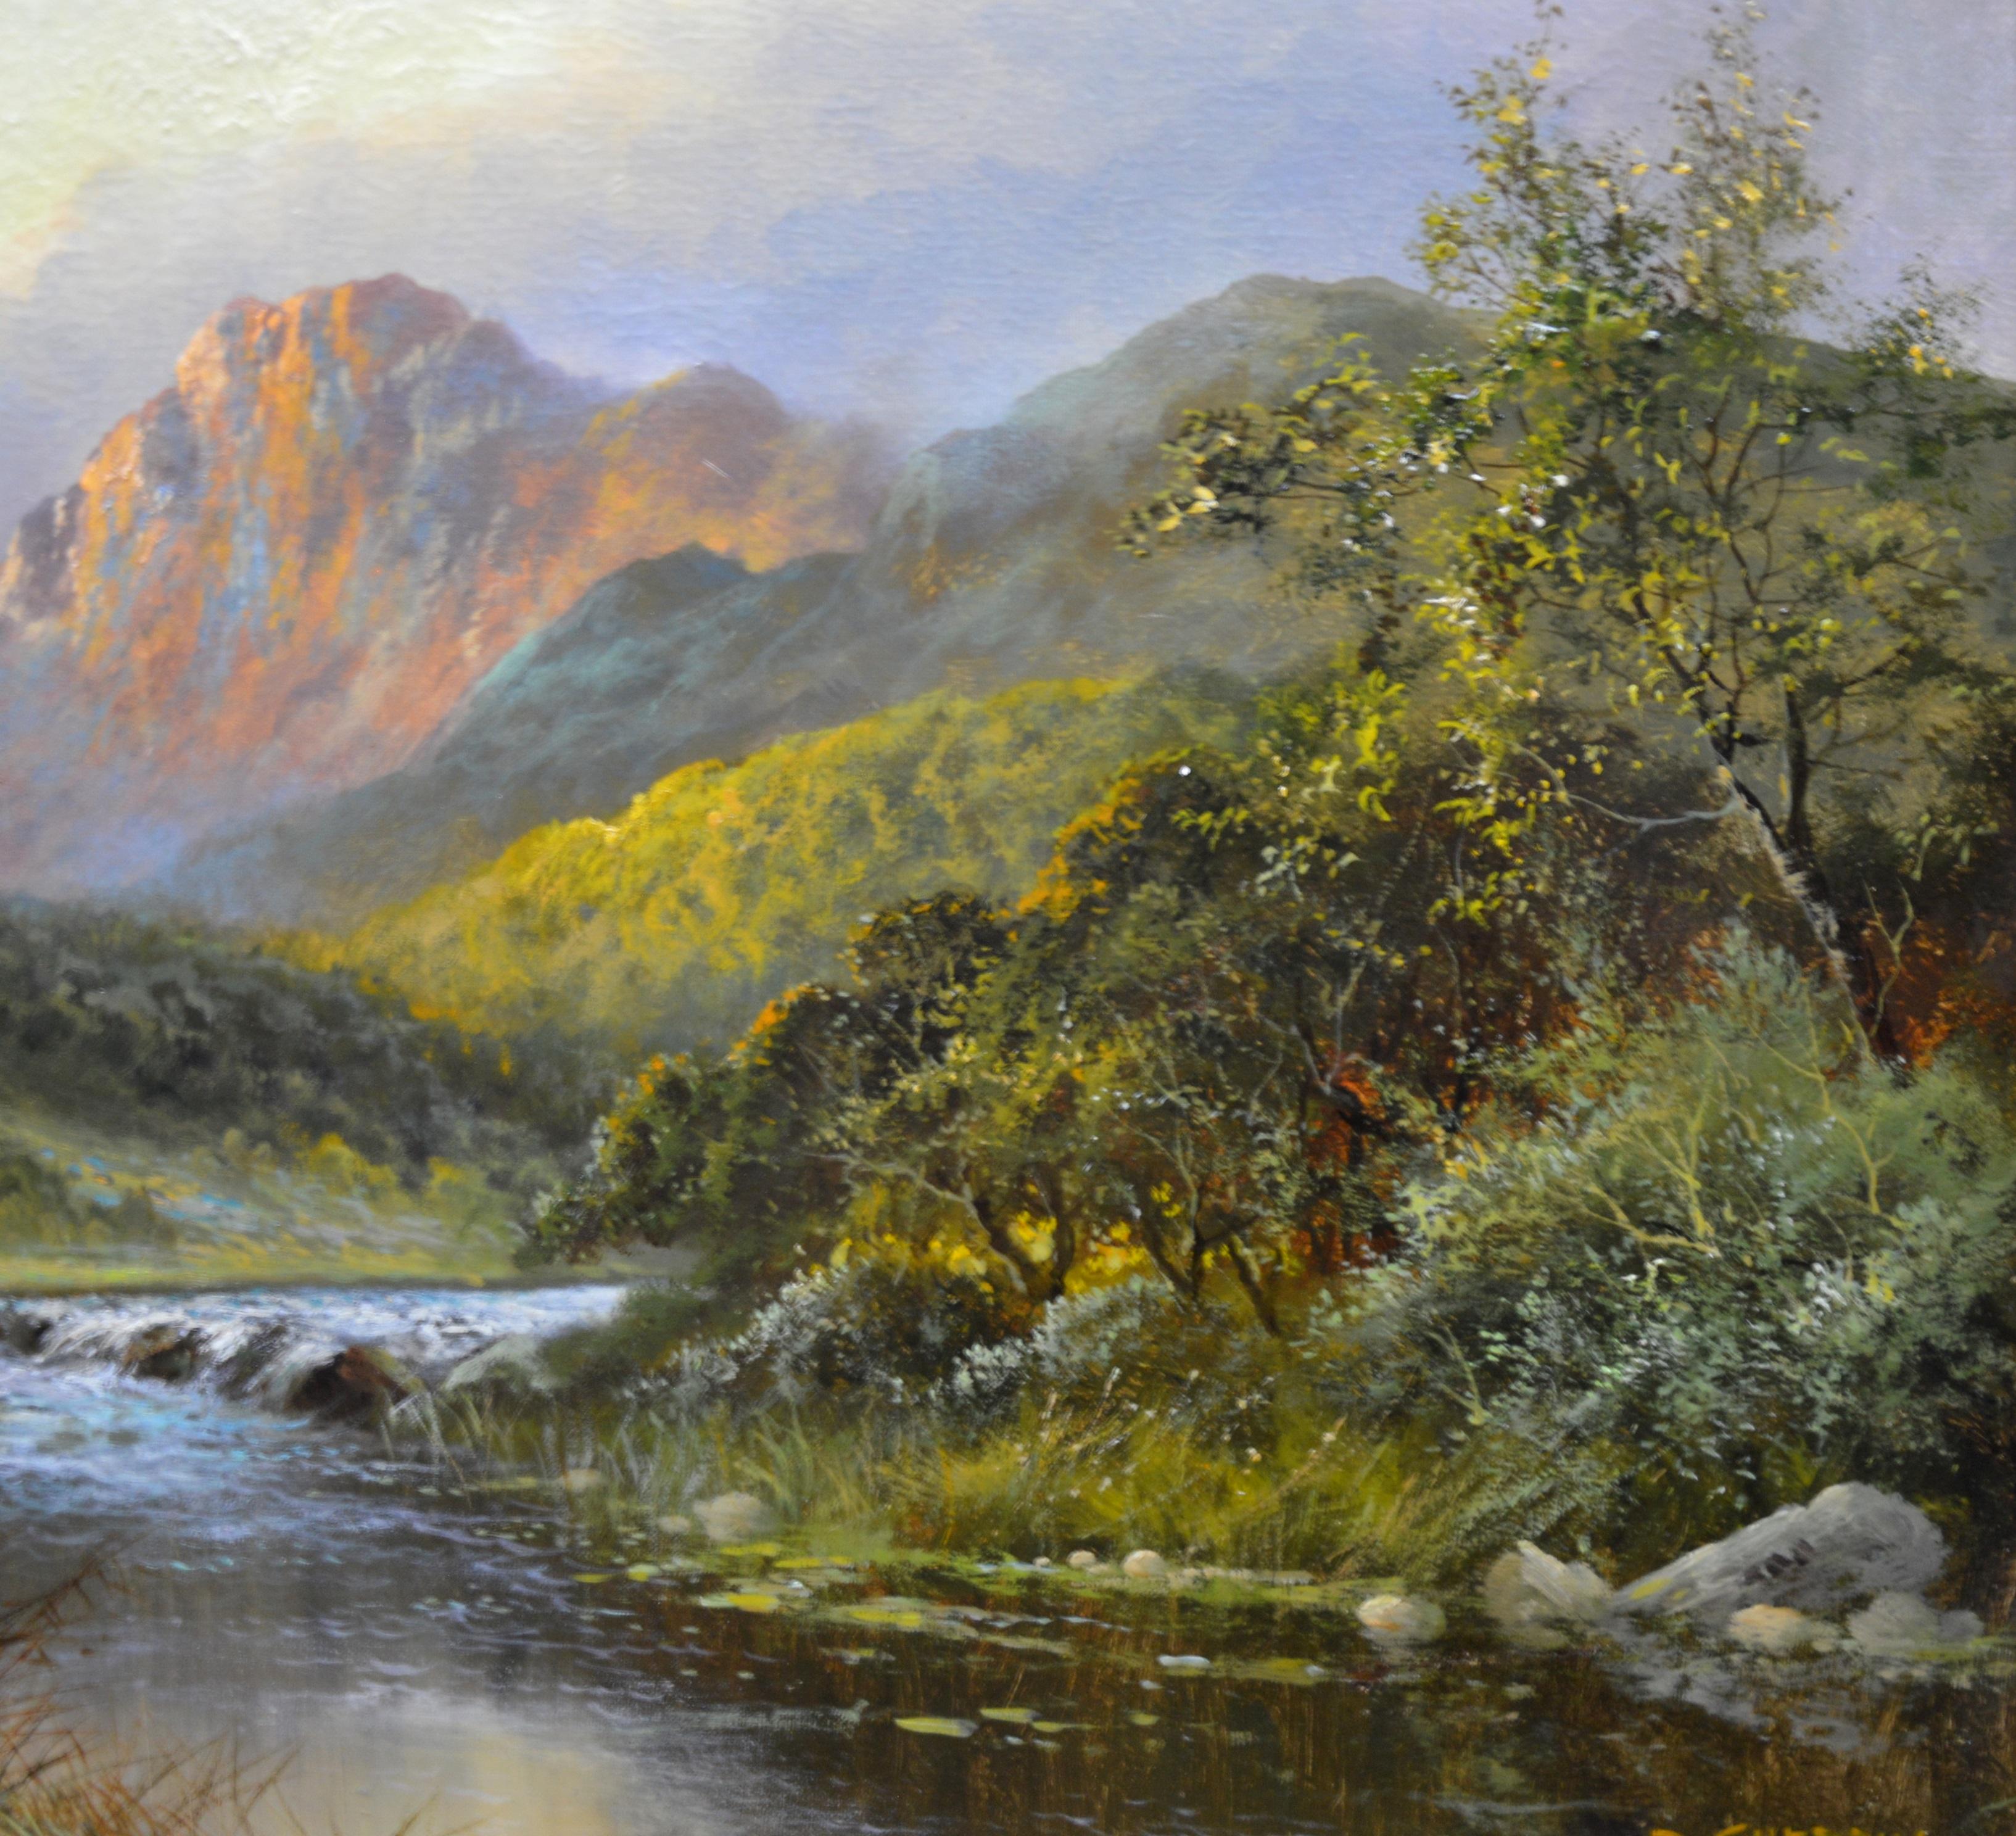 This is a large fine late 19th century oil on canvas depicting a shallow river falls before a mountainous landscape at sunset in ‘Wester Ross, Scotland’ by the very popular listed artist Daniel Sherrin (1868-1940). The painting is signed by the